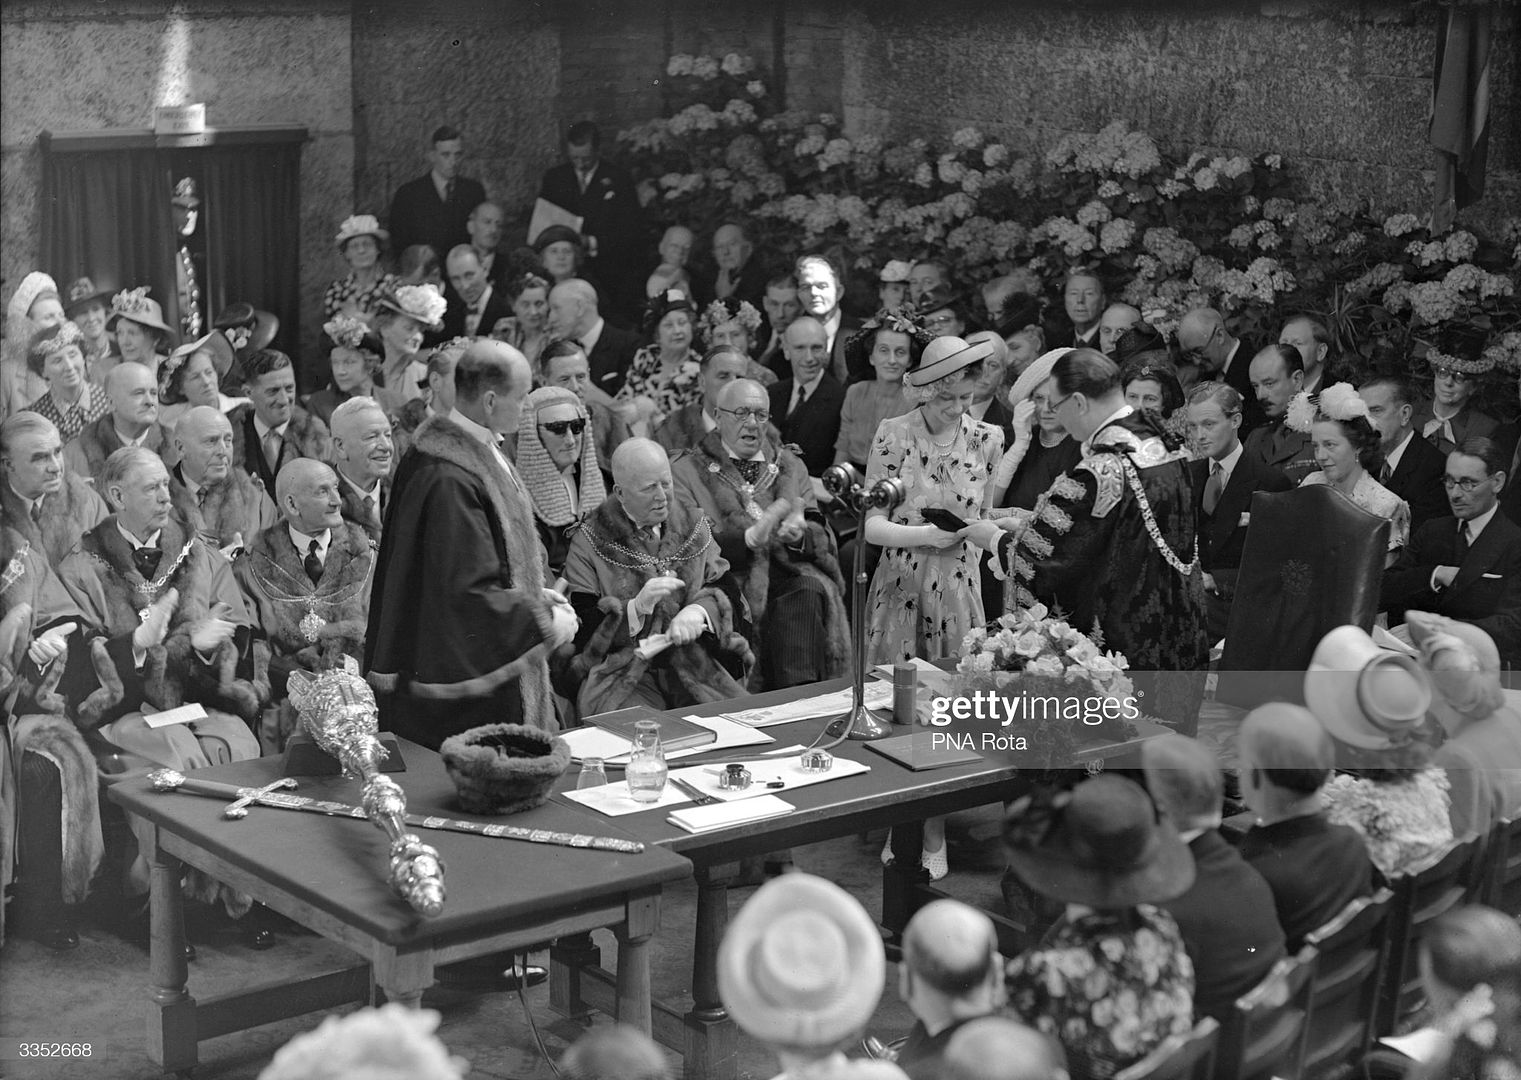 1947_11_June_receiving_brooch_at_Guildhall_gettyimages-3352668-2048x2048